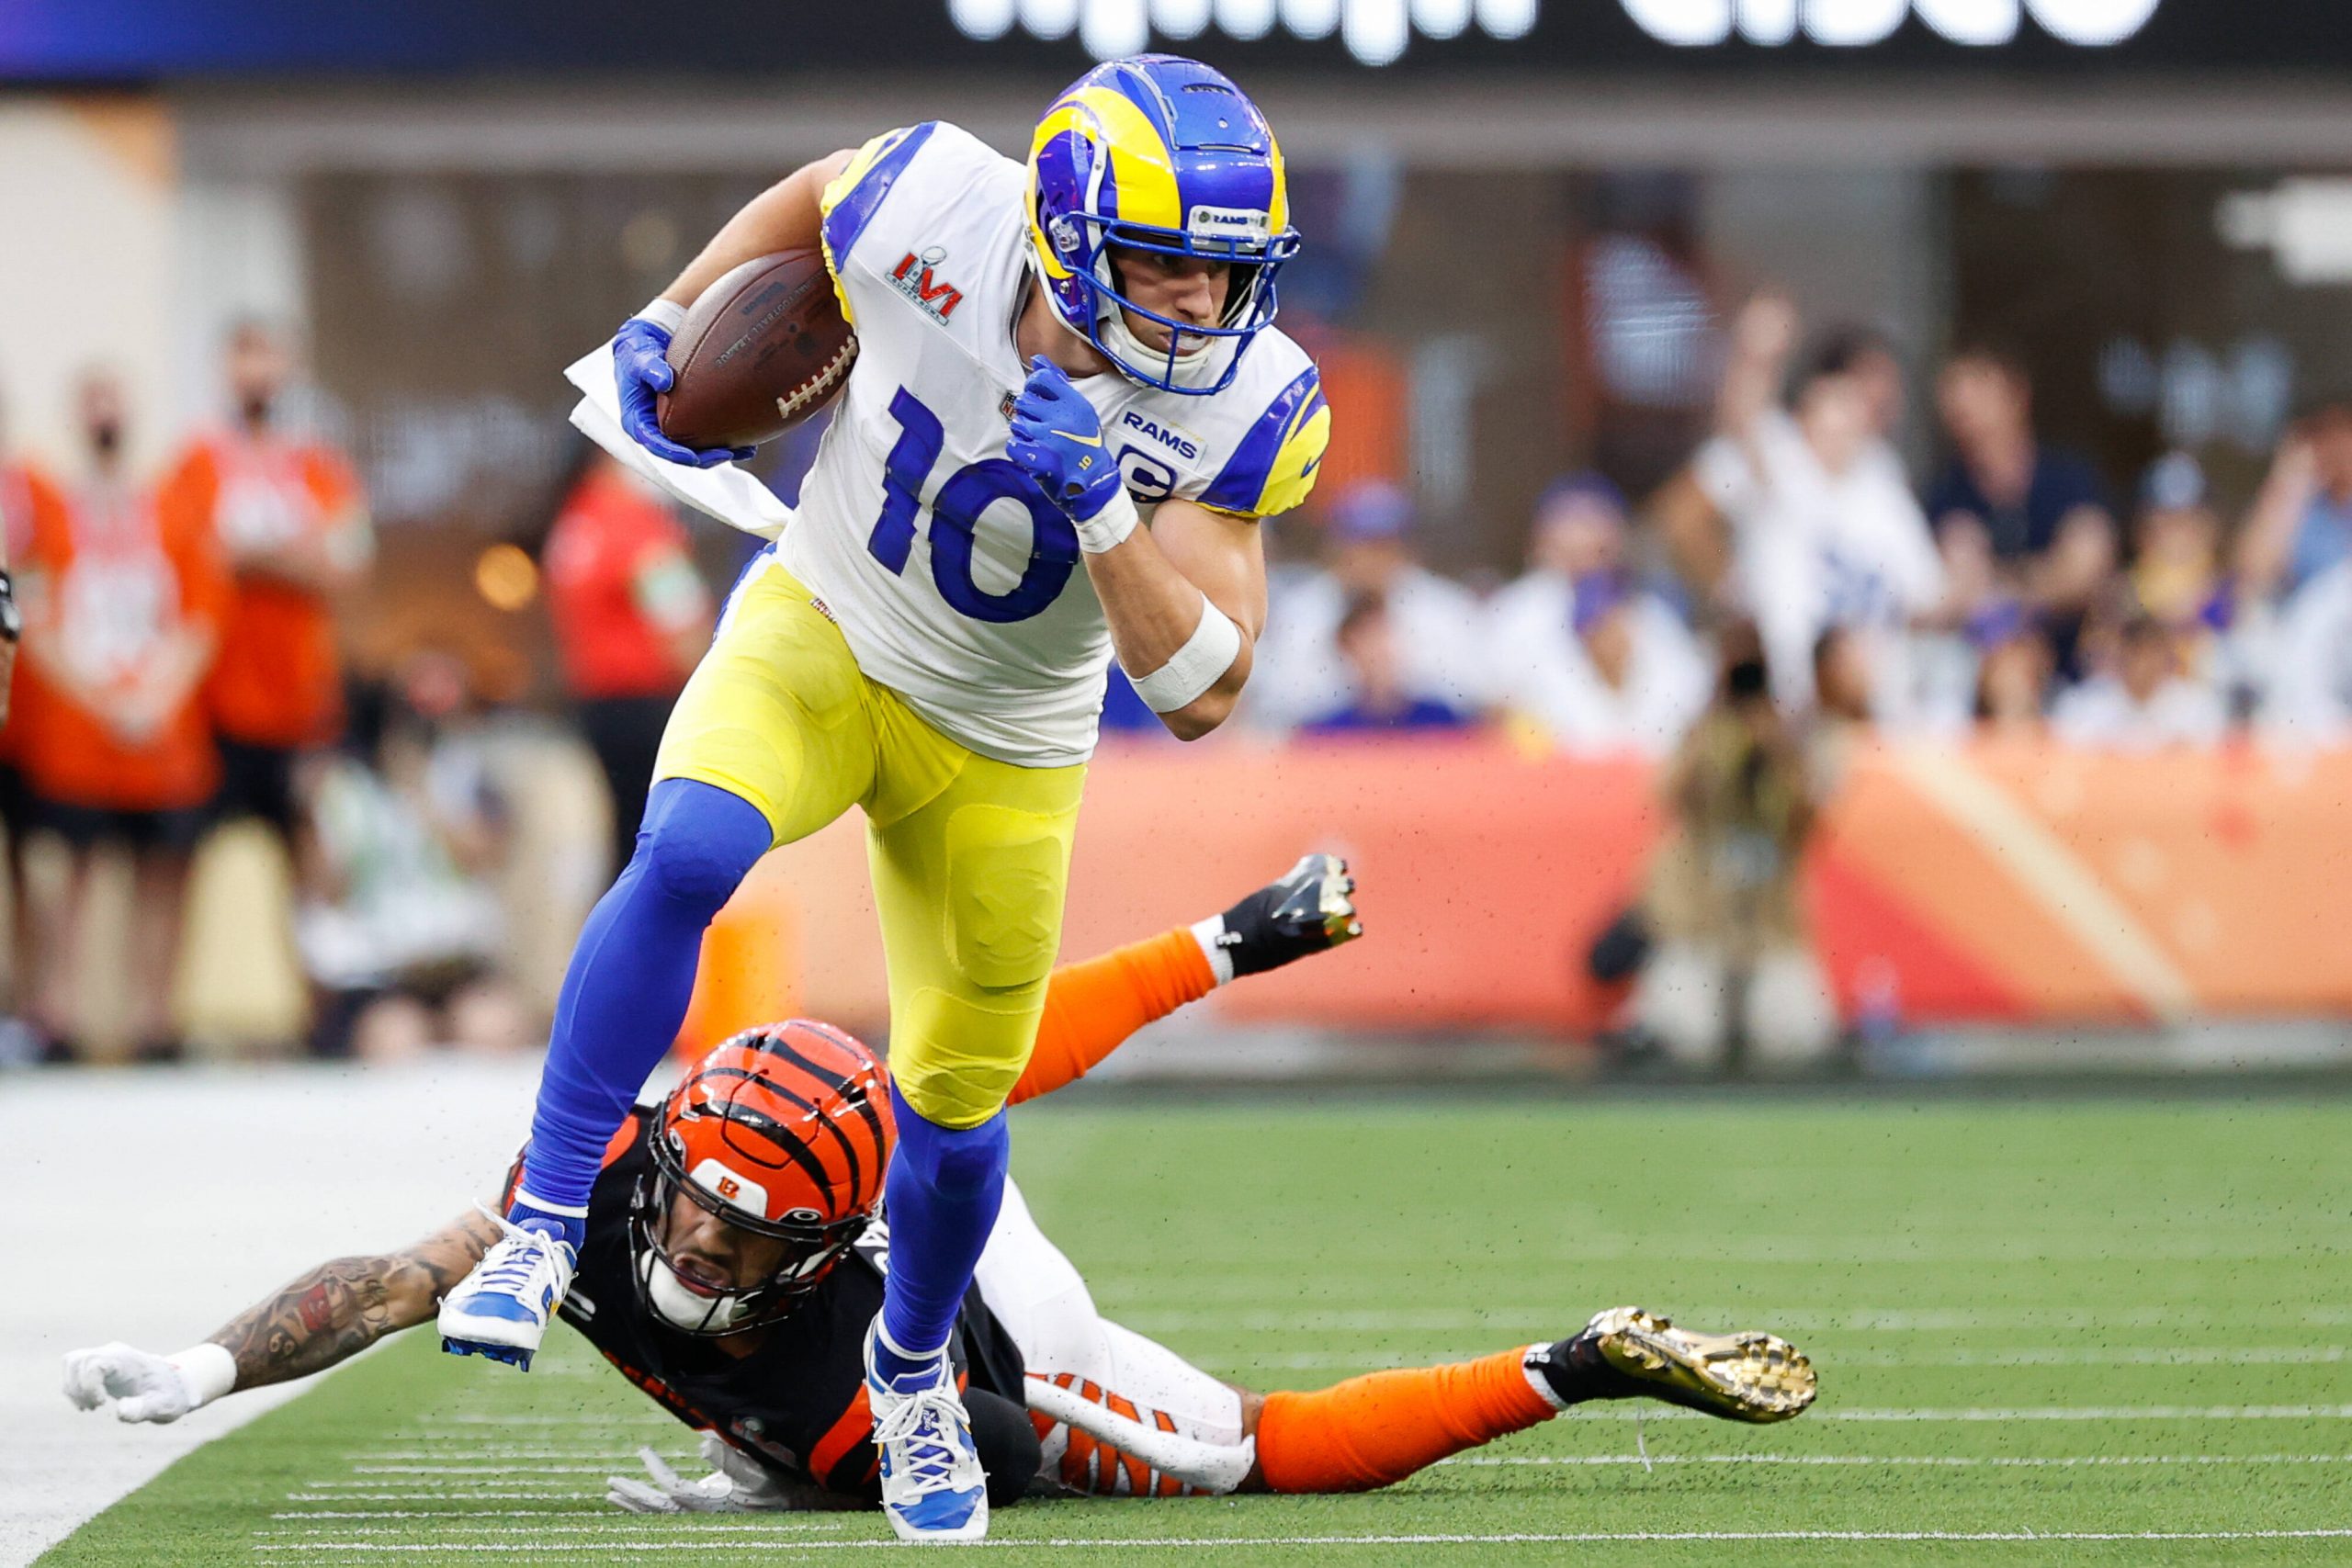 Los Angeles Rams wide receiver Cooper Kupp (10) dodges a Cincinnati Bengals defender on a 20-yard reception in the first